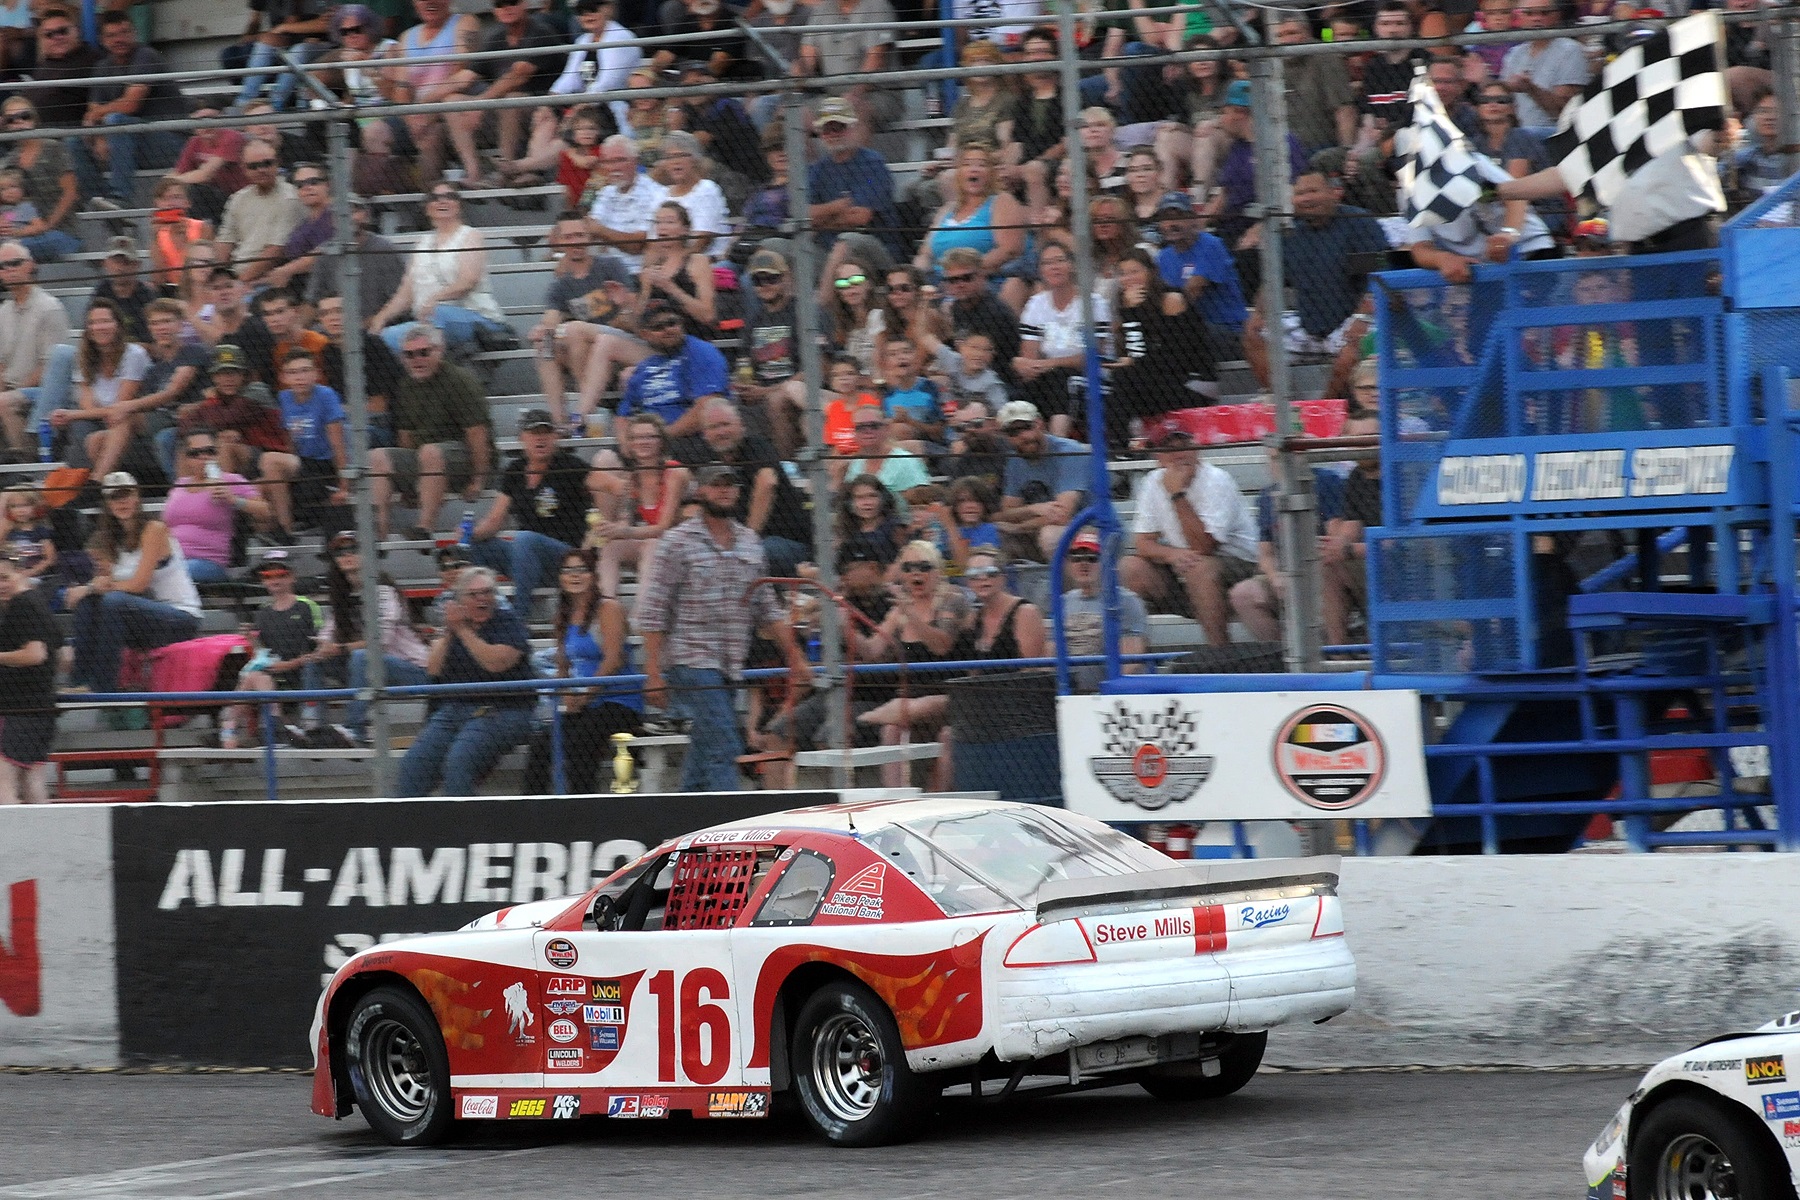 Super Late Model driver Steve Mills crossing the finish line at Colorado National Speedway. (Starr photo)